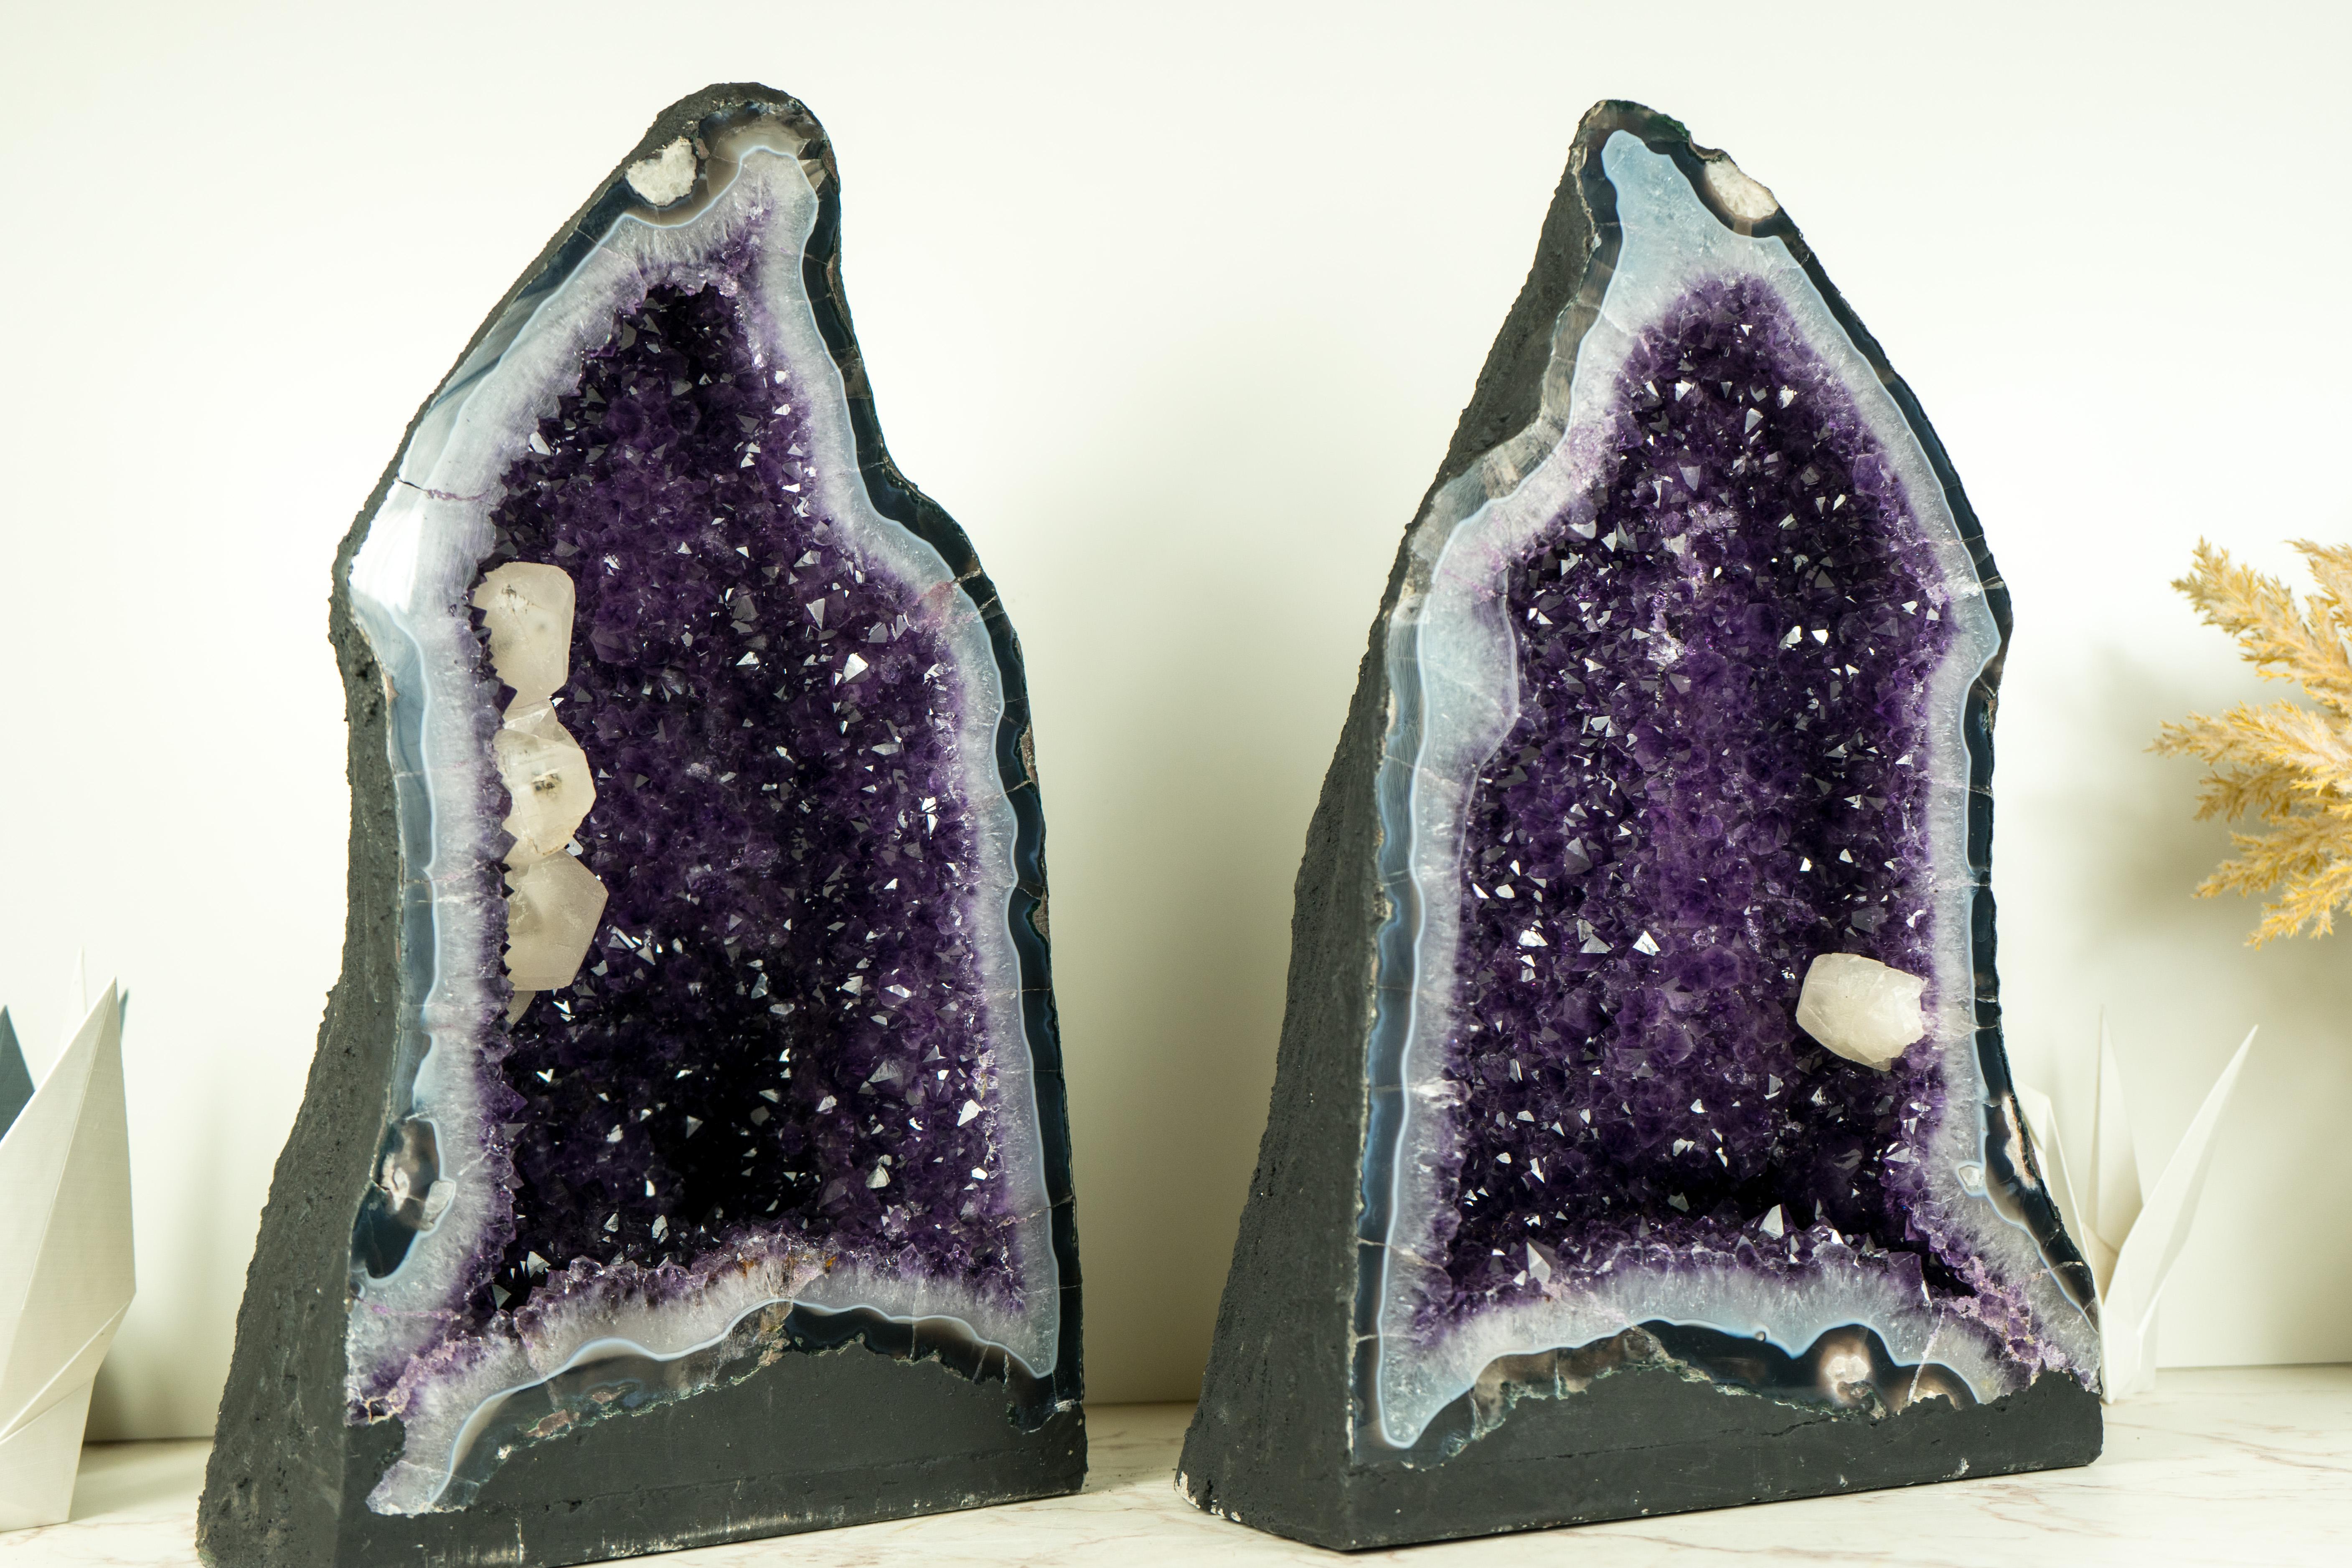 A pair of Amethyst geodes, each standing as an impressive natural sculpture, feature calcite, deep purple and shiny amethyst, and aesthetically pleasing calcite inclusions interlacing, forming a unique display of natural artistry. These centerpiece